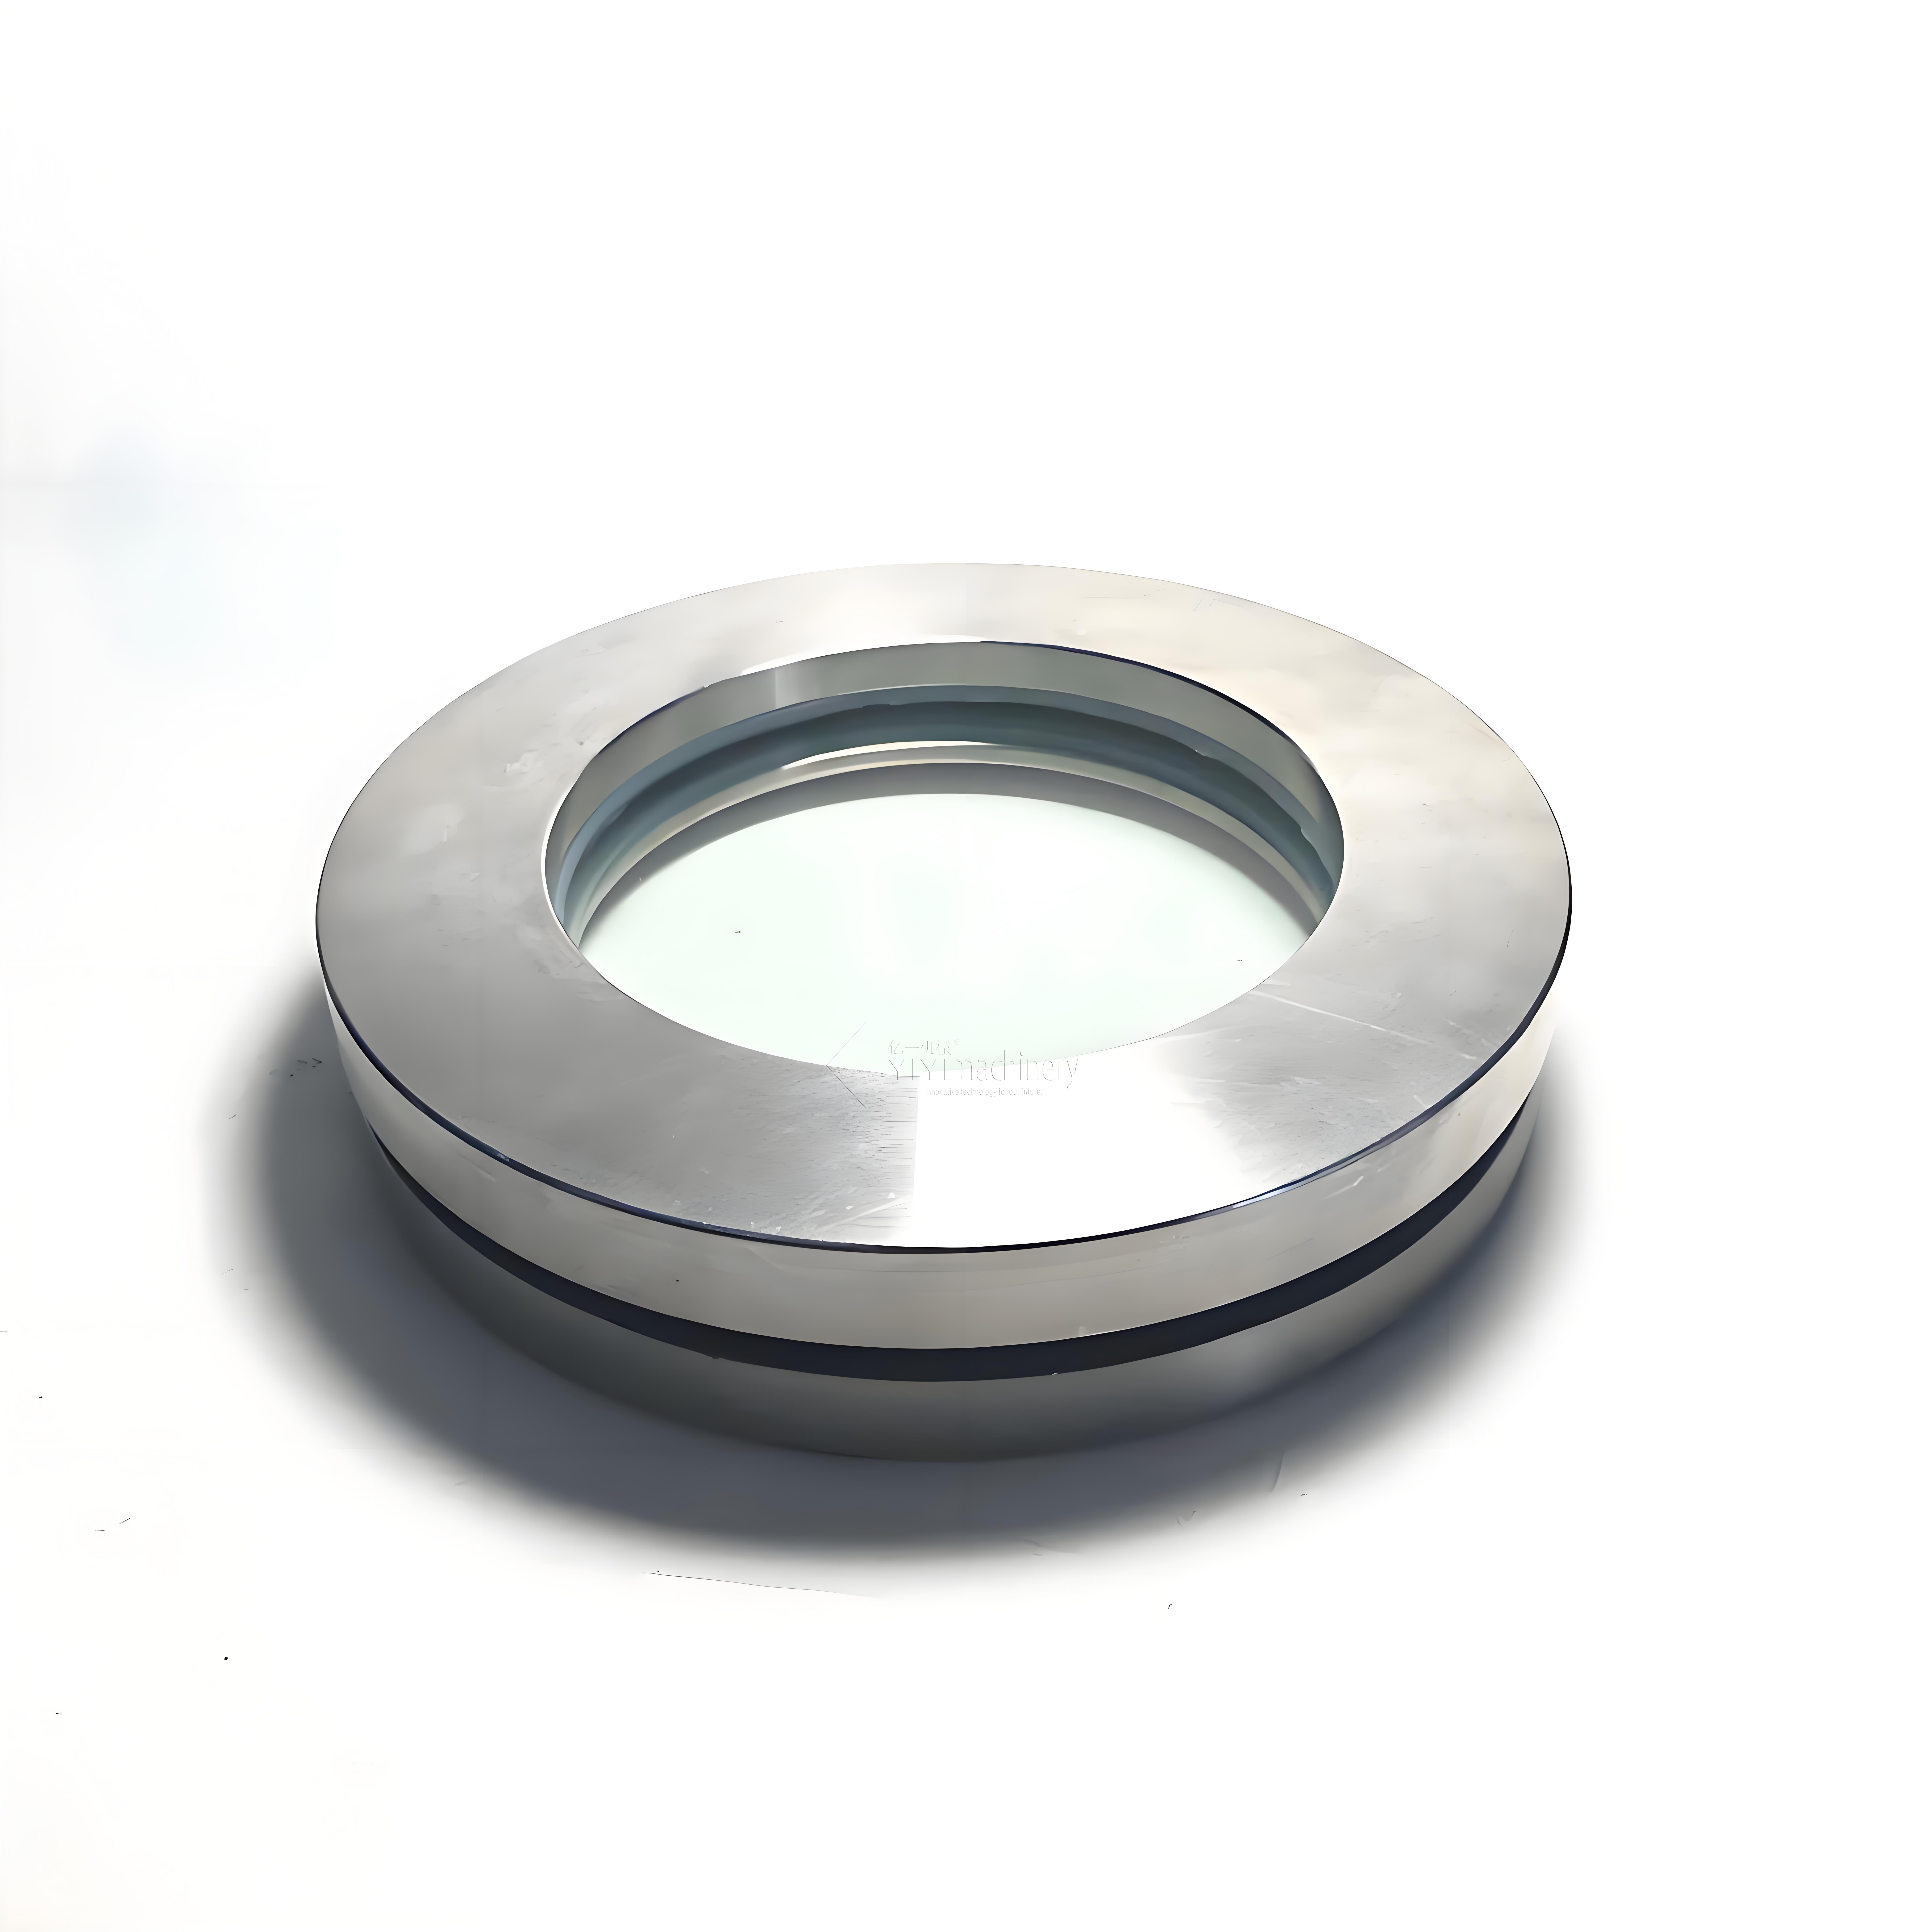 Sanitary Stainless Steel Welding Union Type Sight Glass Welding Connection Sight Welding inspection sight glass